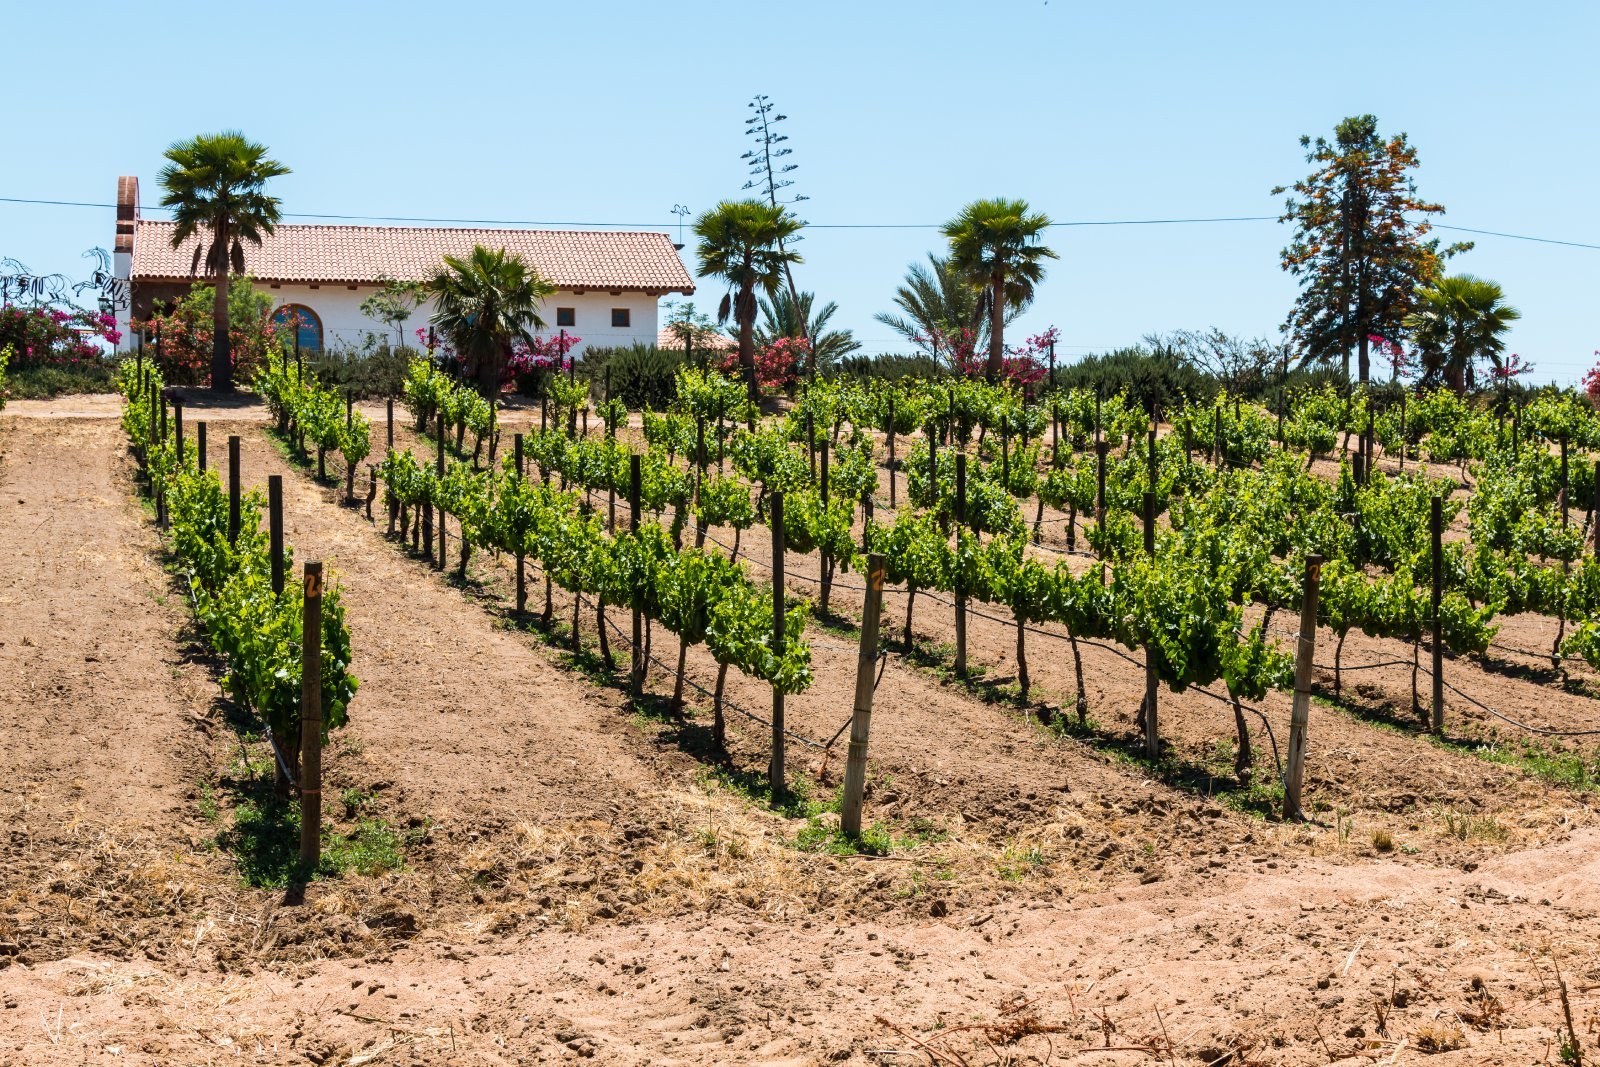 <p class="wp-caption-text">Image Credit: Shutterstock / Sherry V Smith</p>  <p><span>The Valle de Guadalupe in Baja California has emerged as Mexico’s premier wine region, known for its innovative wineries and Mediterranean-like climate. The valley offers a scenic backdrop for wine tasting, with a growing number of boutique wineries and farm-to-table restaurants showcasing the region’s agricultural bounty. The area’s unique wines and culinary experiences make it a must-visit for food and wine enthusiasts.</span></p>